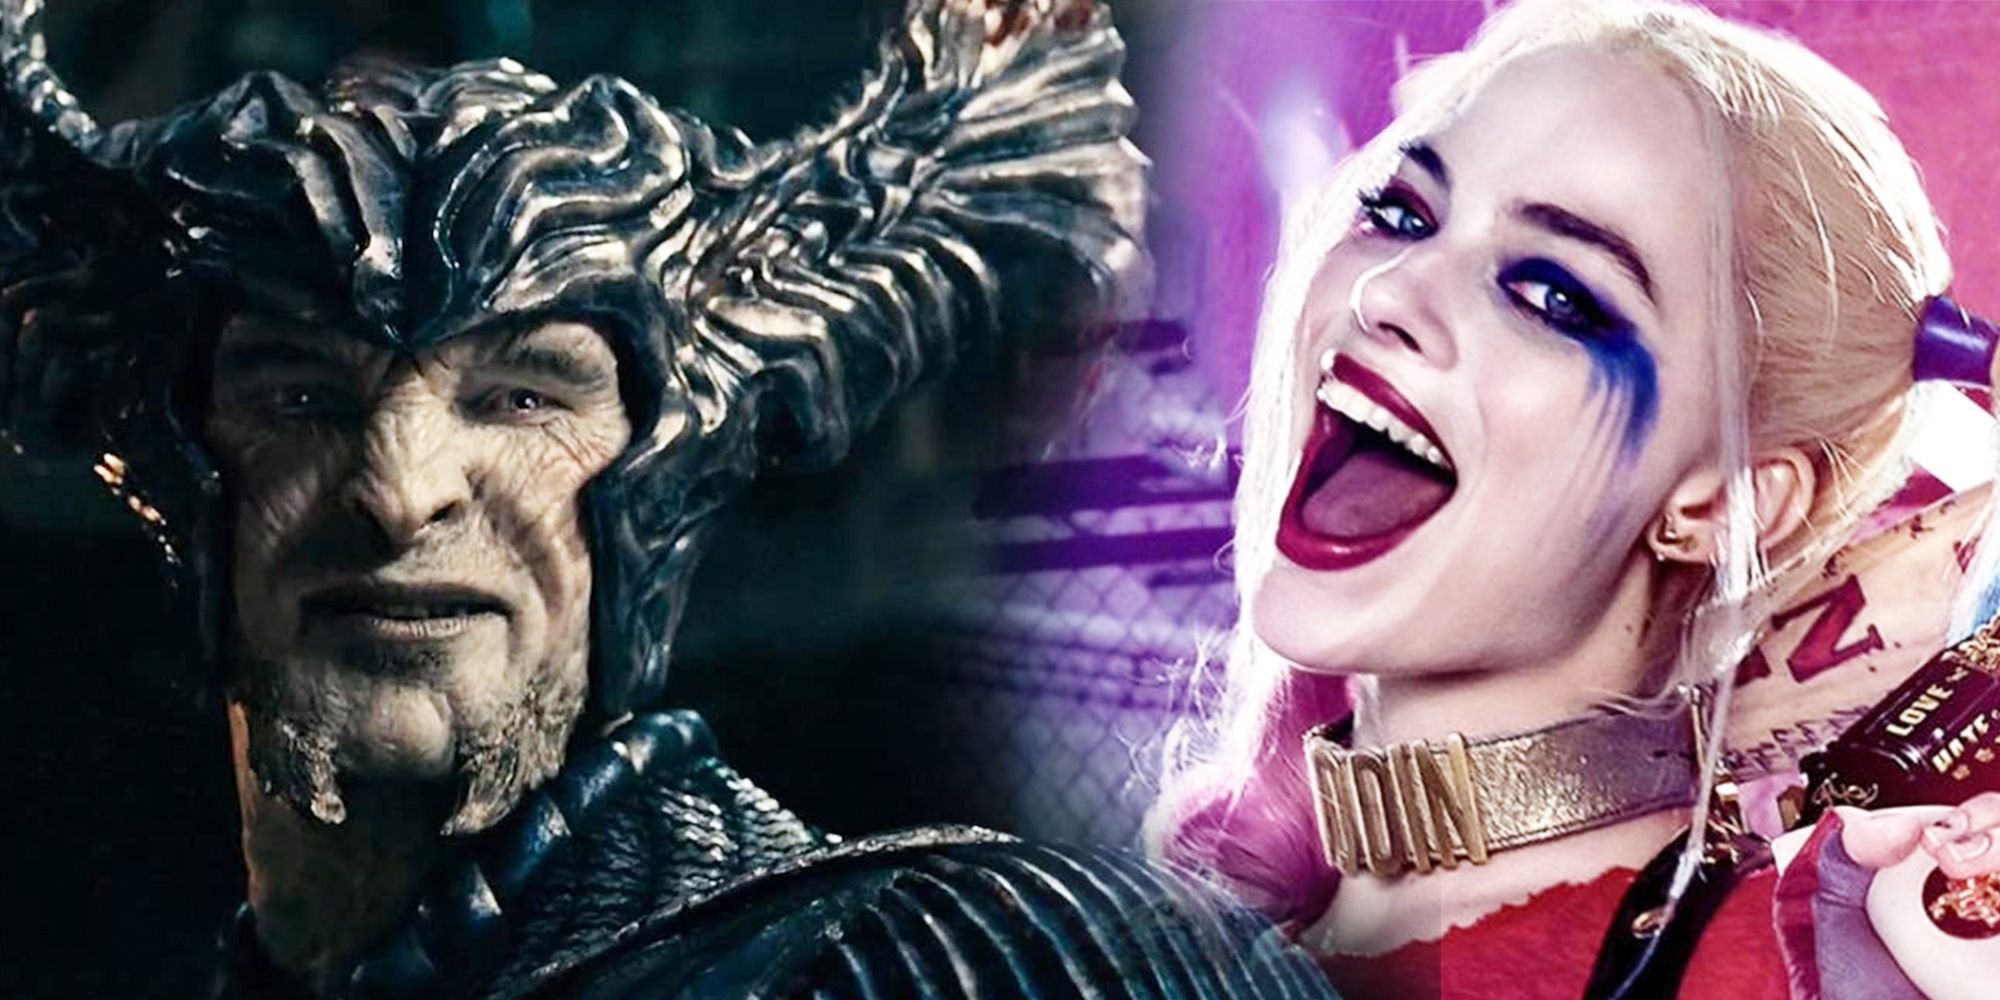 Steppenwolf from Justice League alongside Margot Robbie as Harley Quinn in Suicide Squad